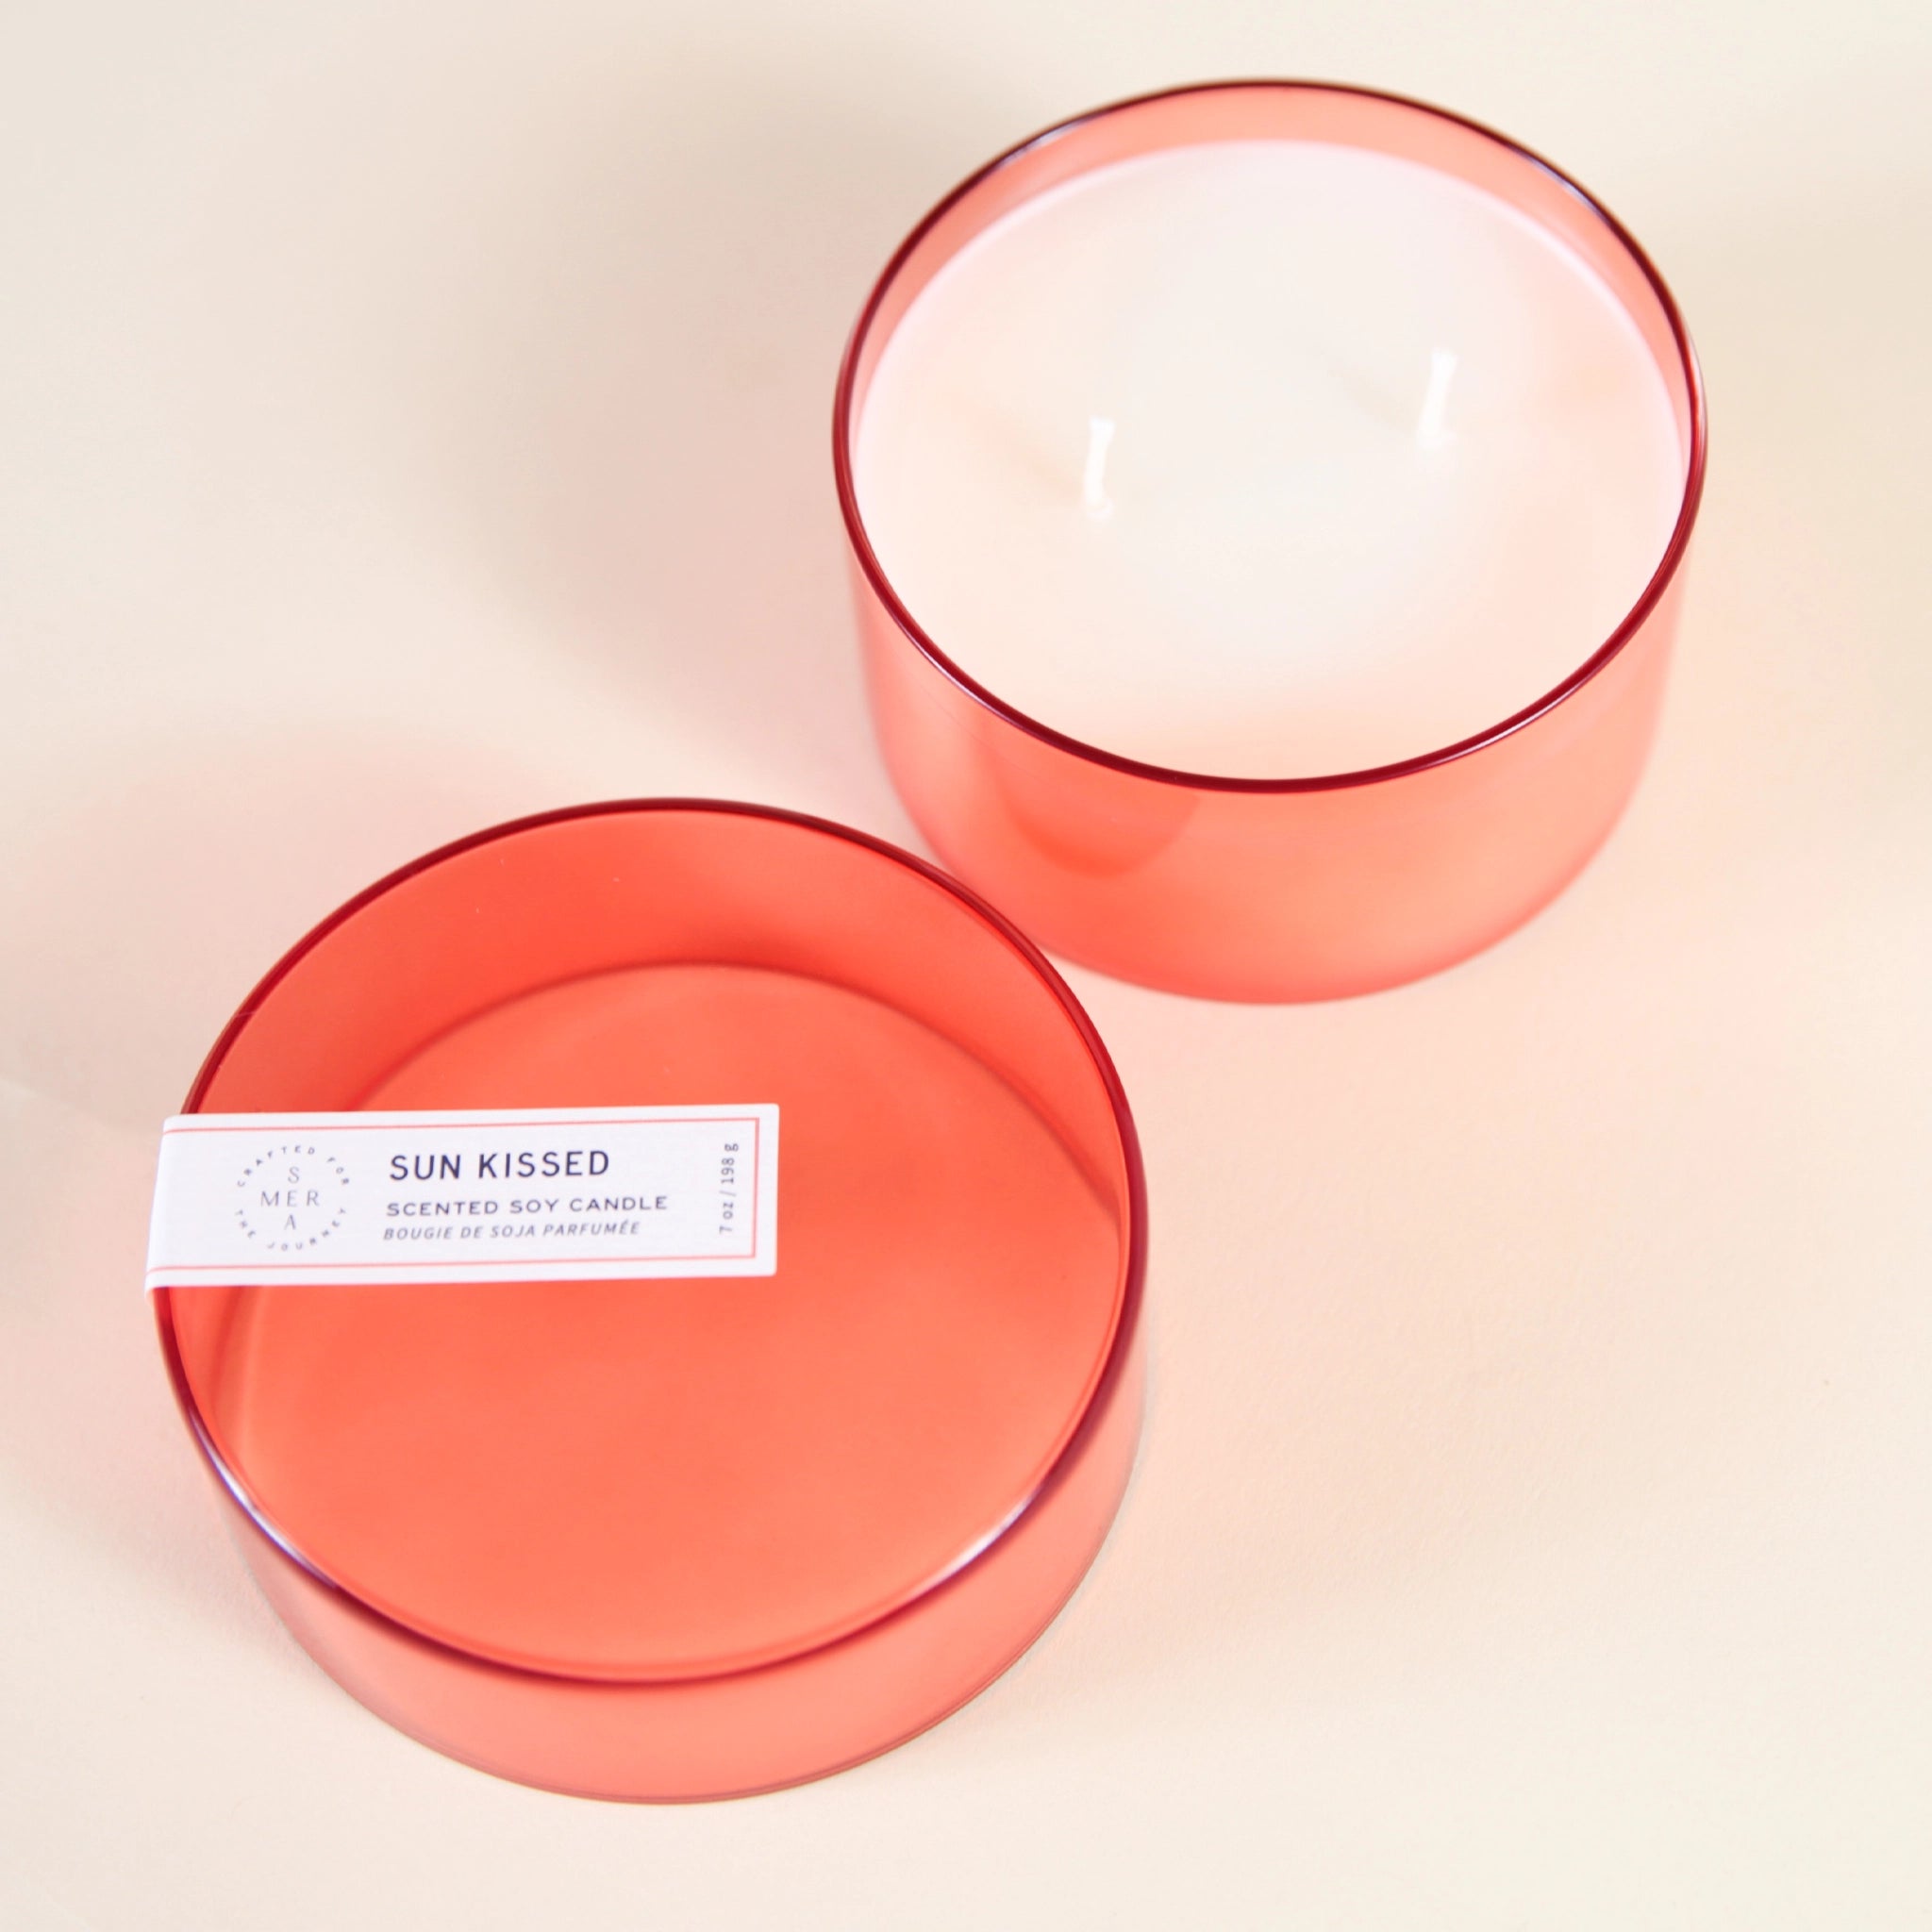 A clear orange/red glass jar candle with white wax and a double wick along with a coordinating glass lid.